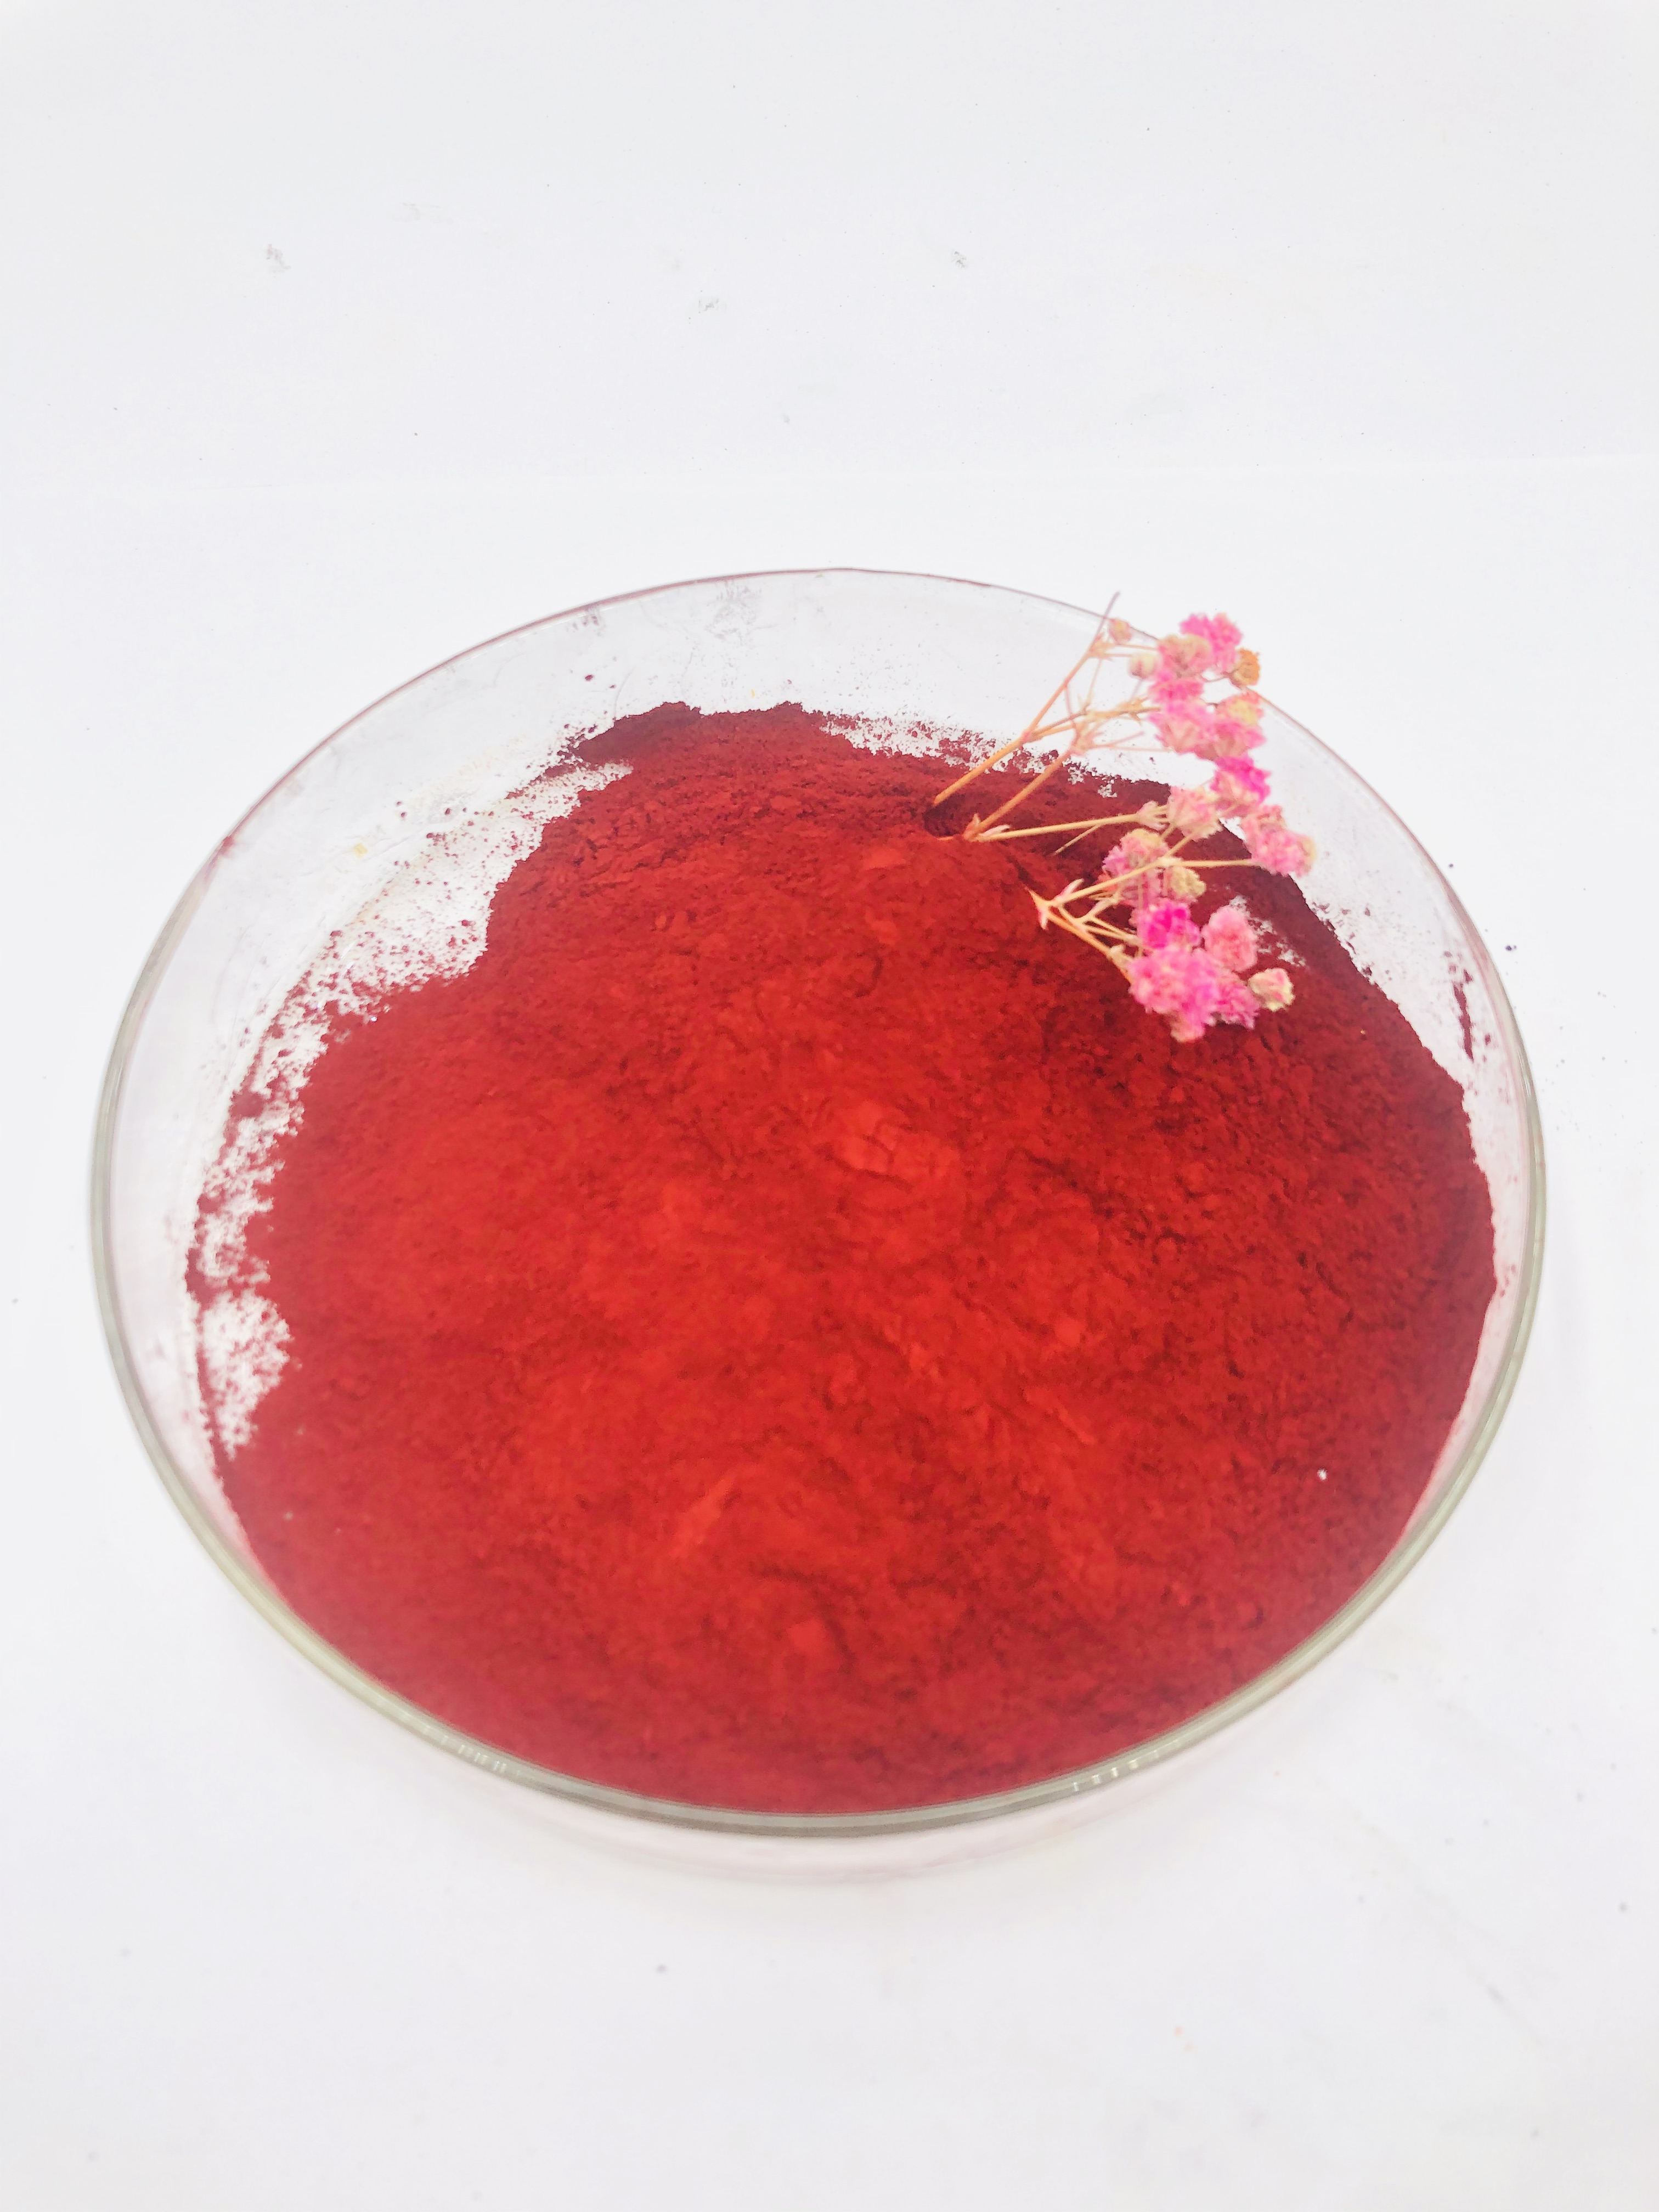 Red 8123 Dark Pink Powder Brilliant Light Fastness Mainly for Wax Coating Plastic